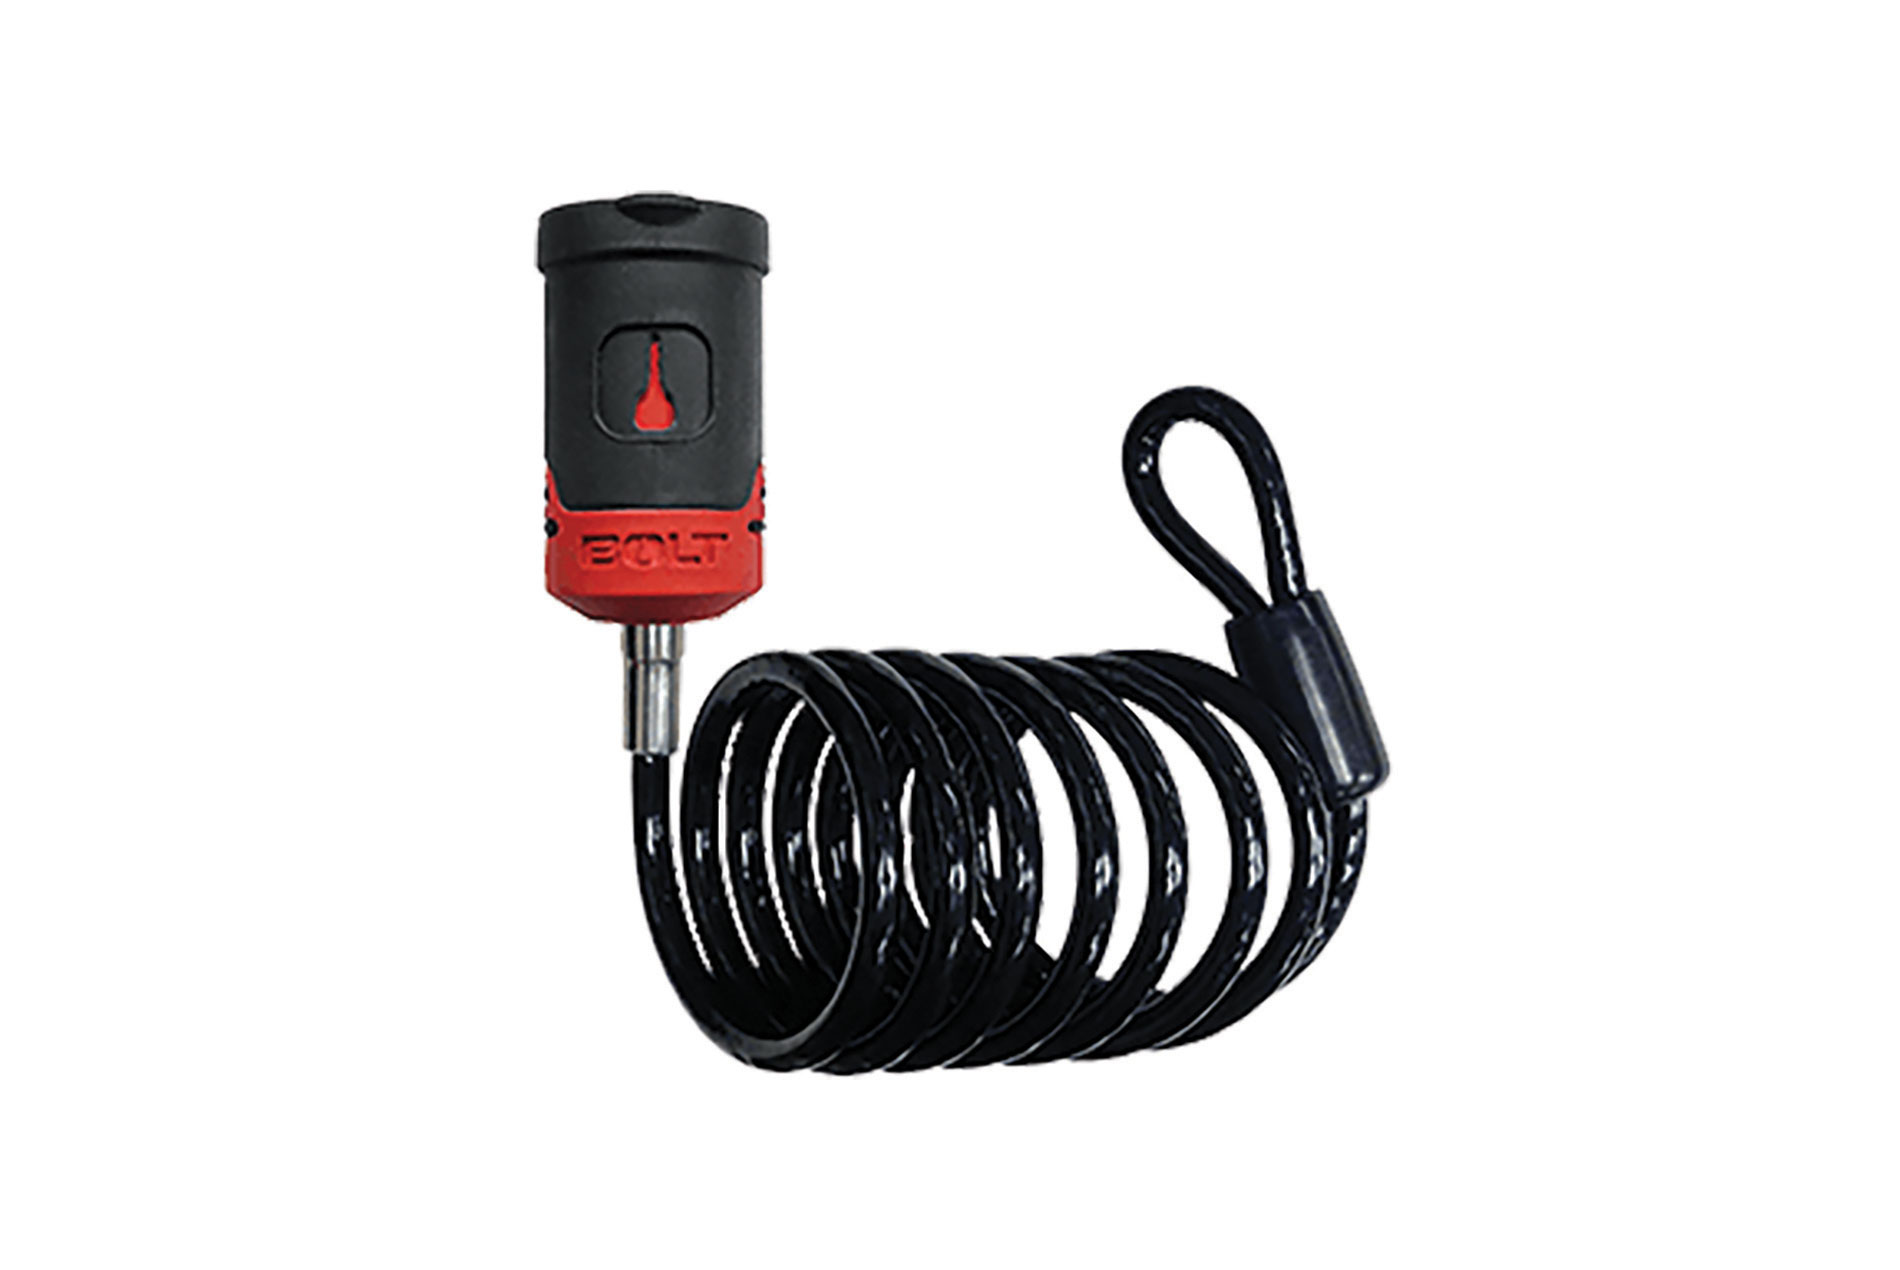 Black and red cable lock. Image by Bolt Lock.